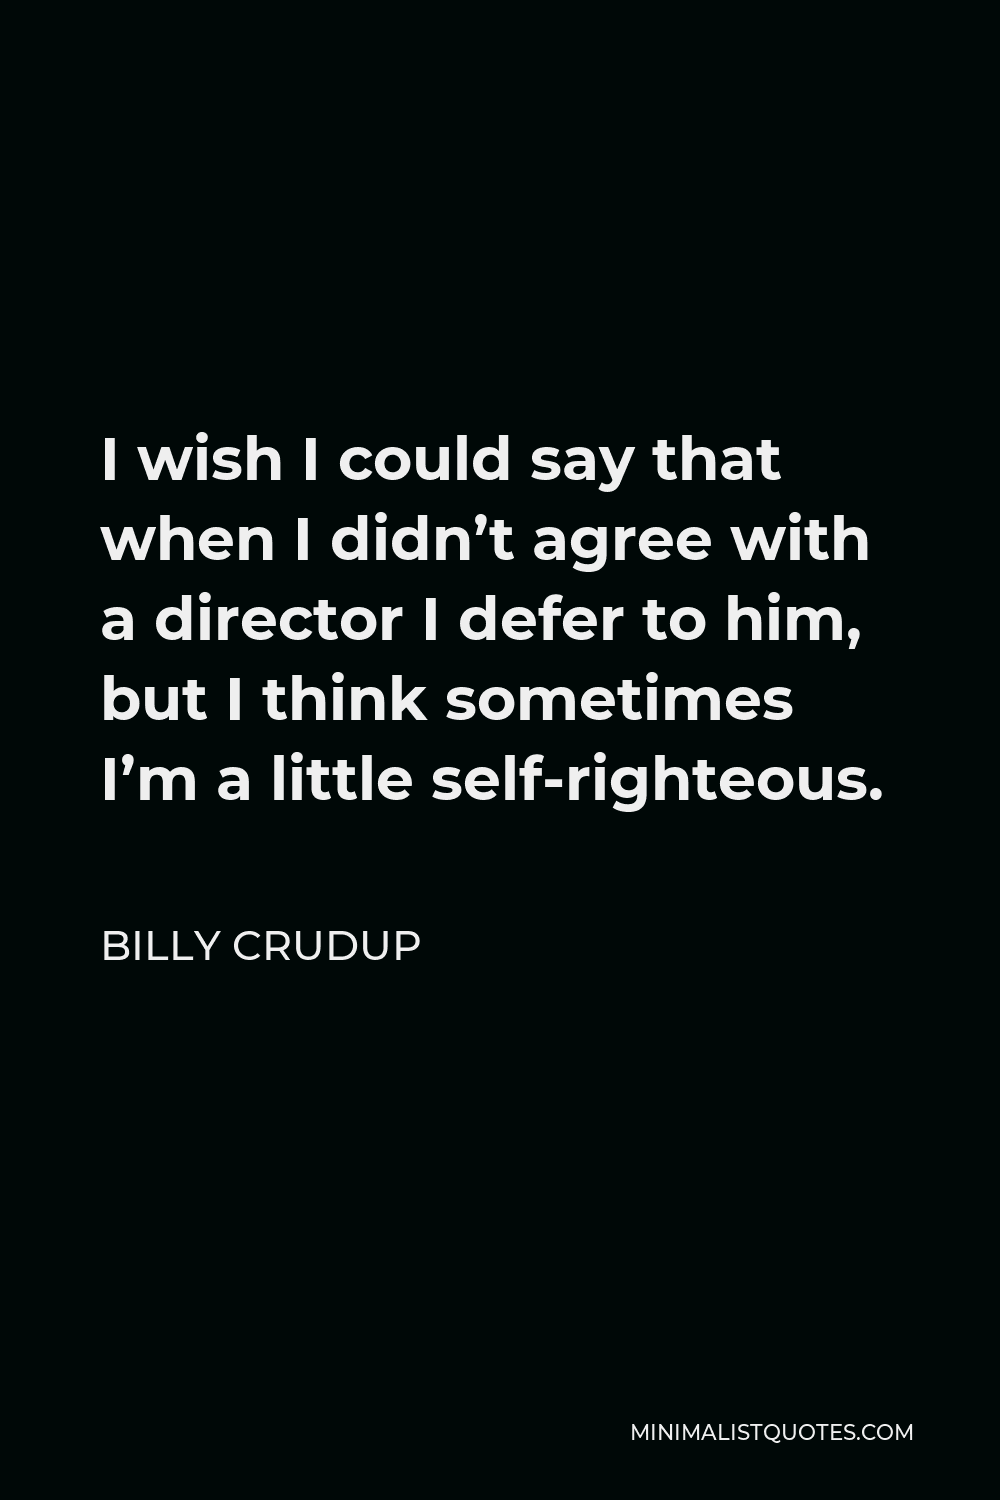 Billy Crudup Quote - I wish I could say that when I didn’t agree with a director I defer to him, but I think sometimes I’m a little self-righteous.